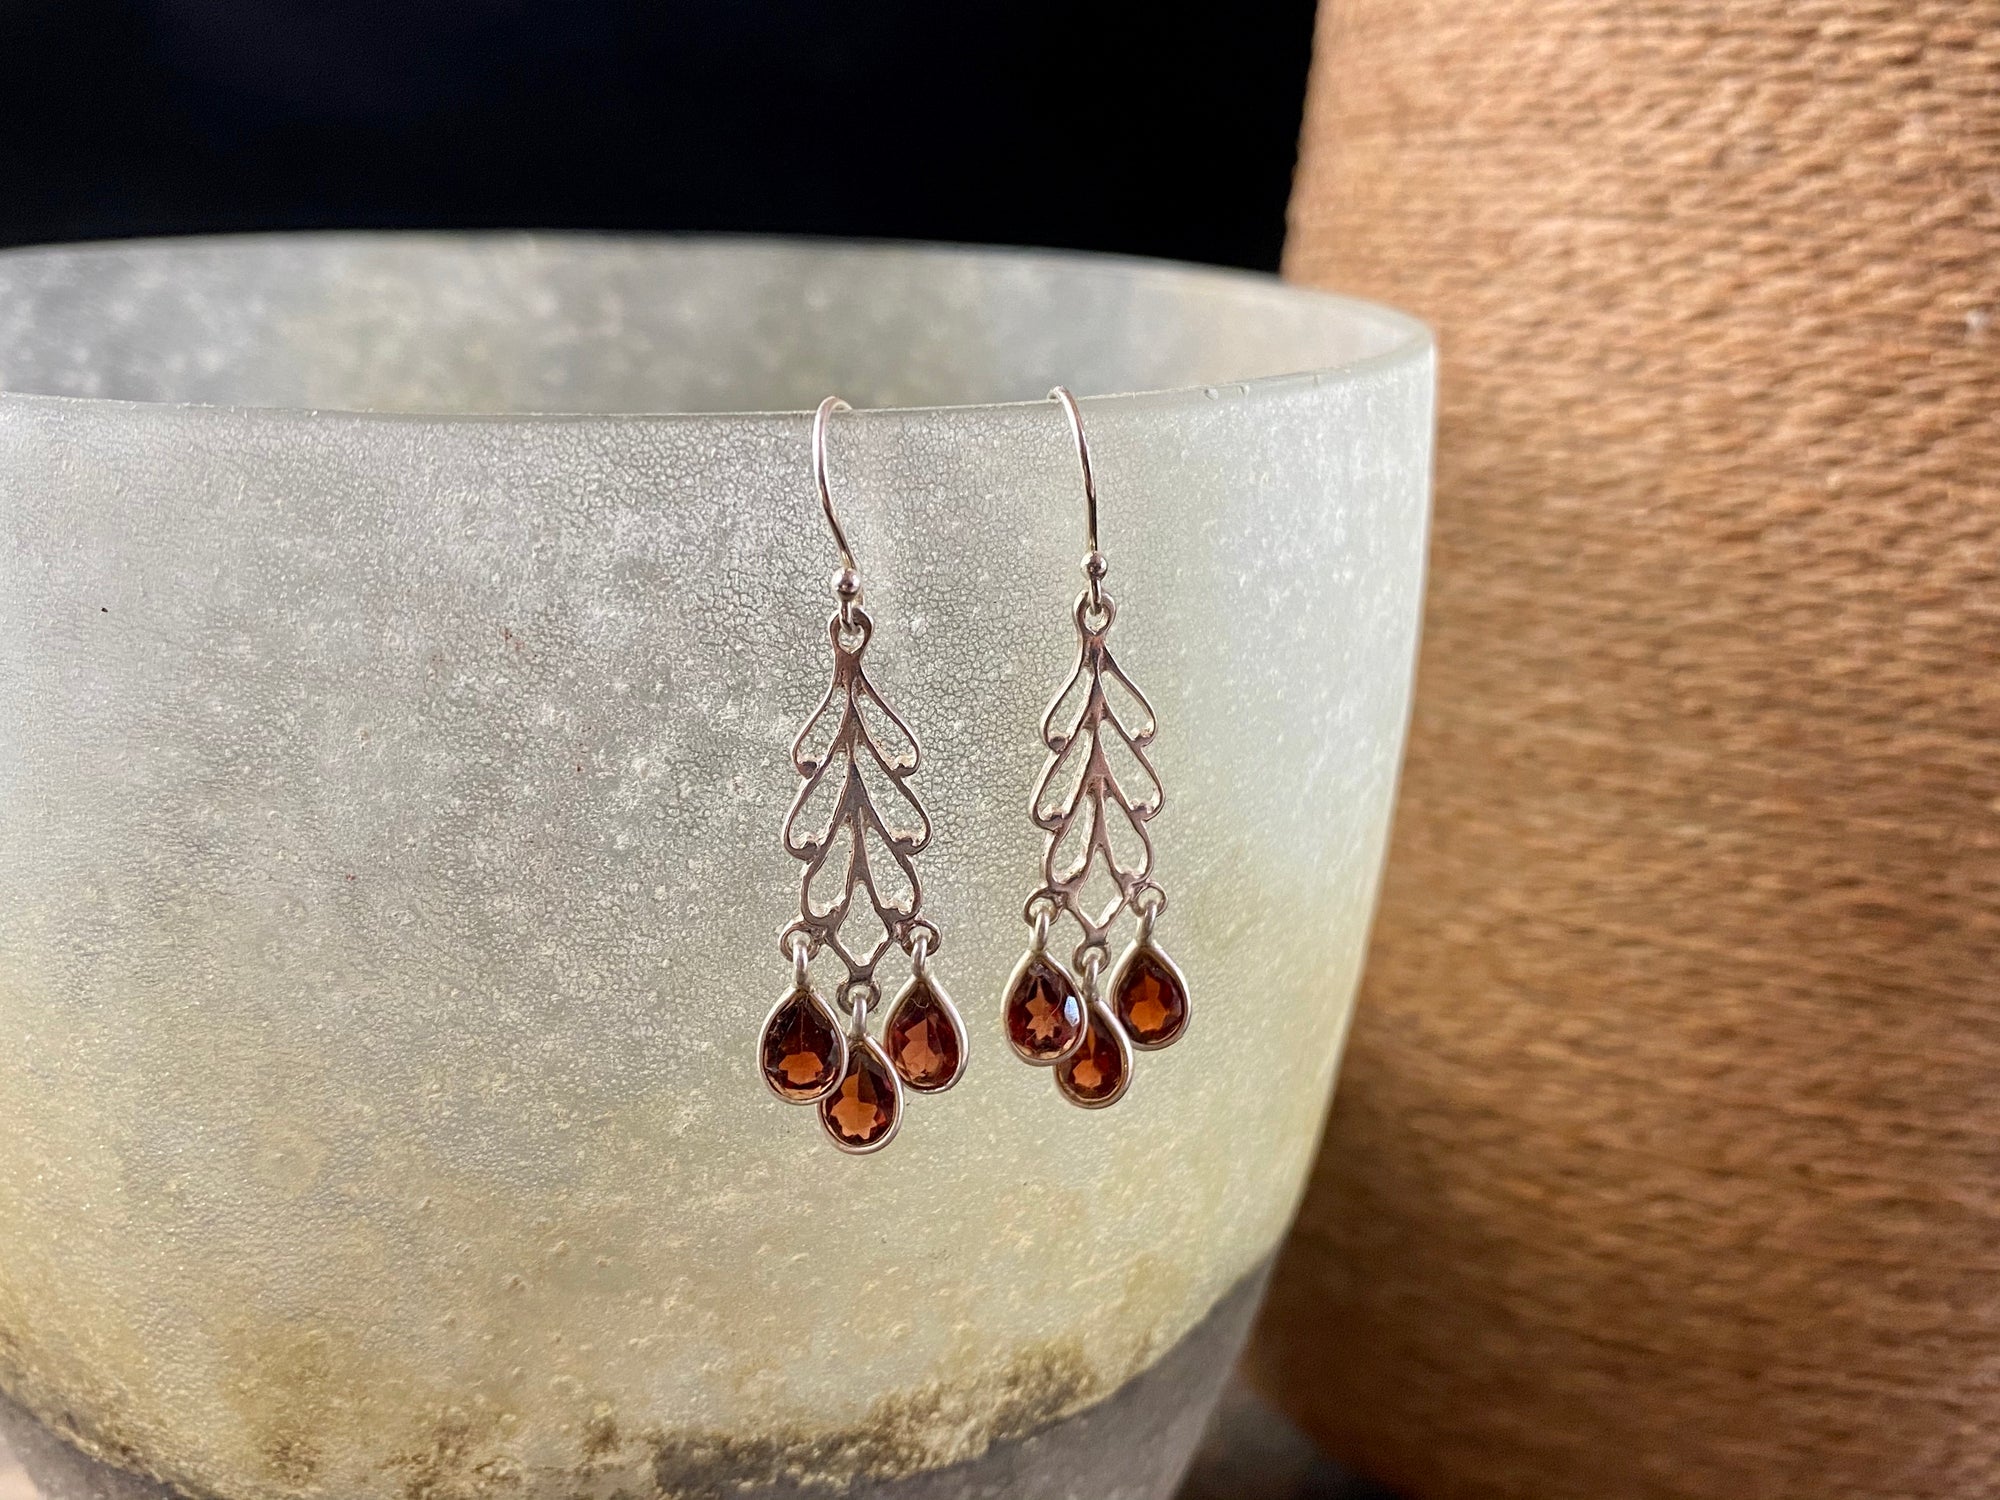 Garnet and silver earrings featuring a silver mount with three perfect facet cut teardrop garnets hanging en tremblant